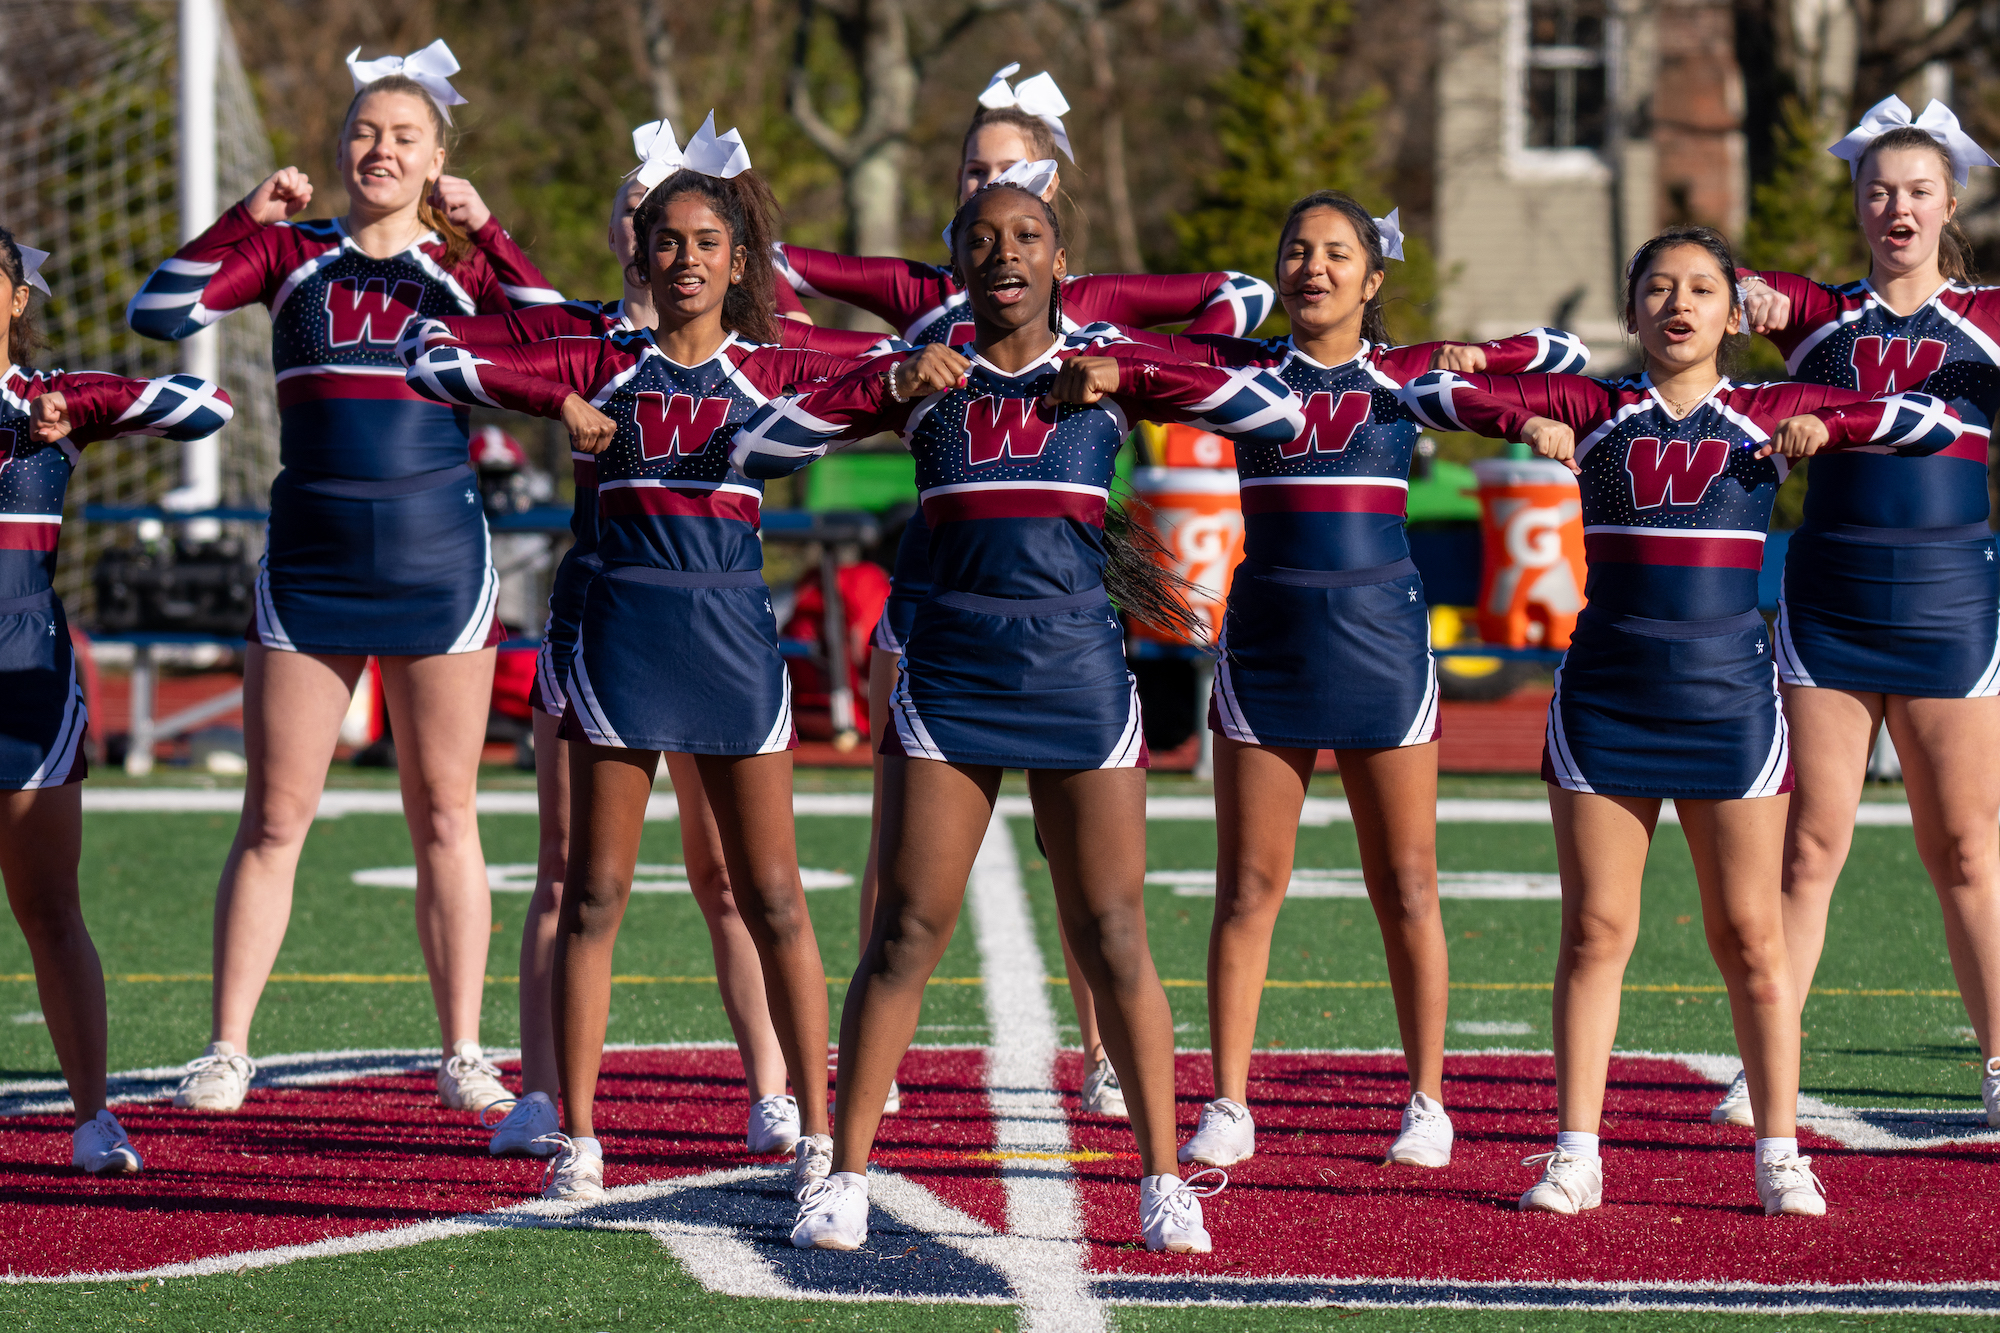 Westborough youth cheerleaders return to the sidelines